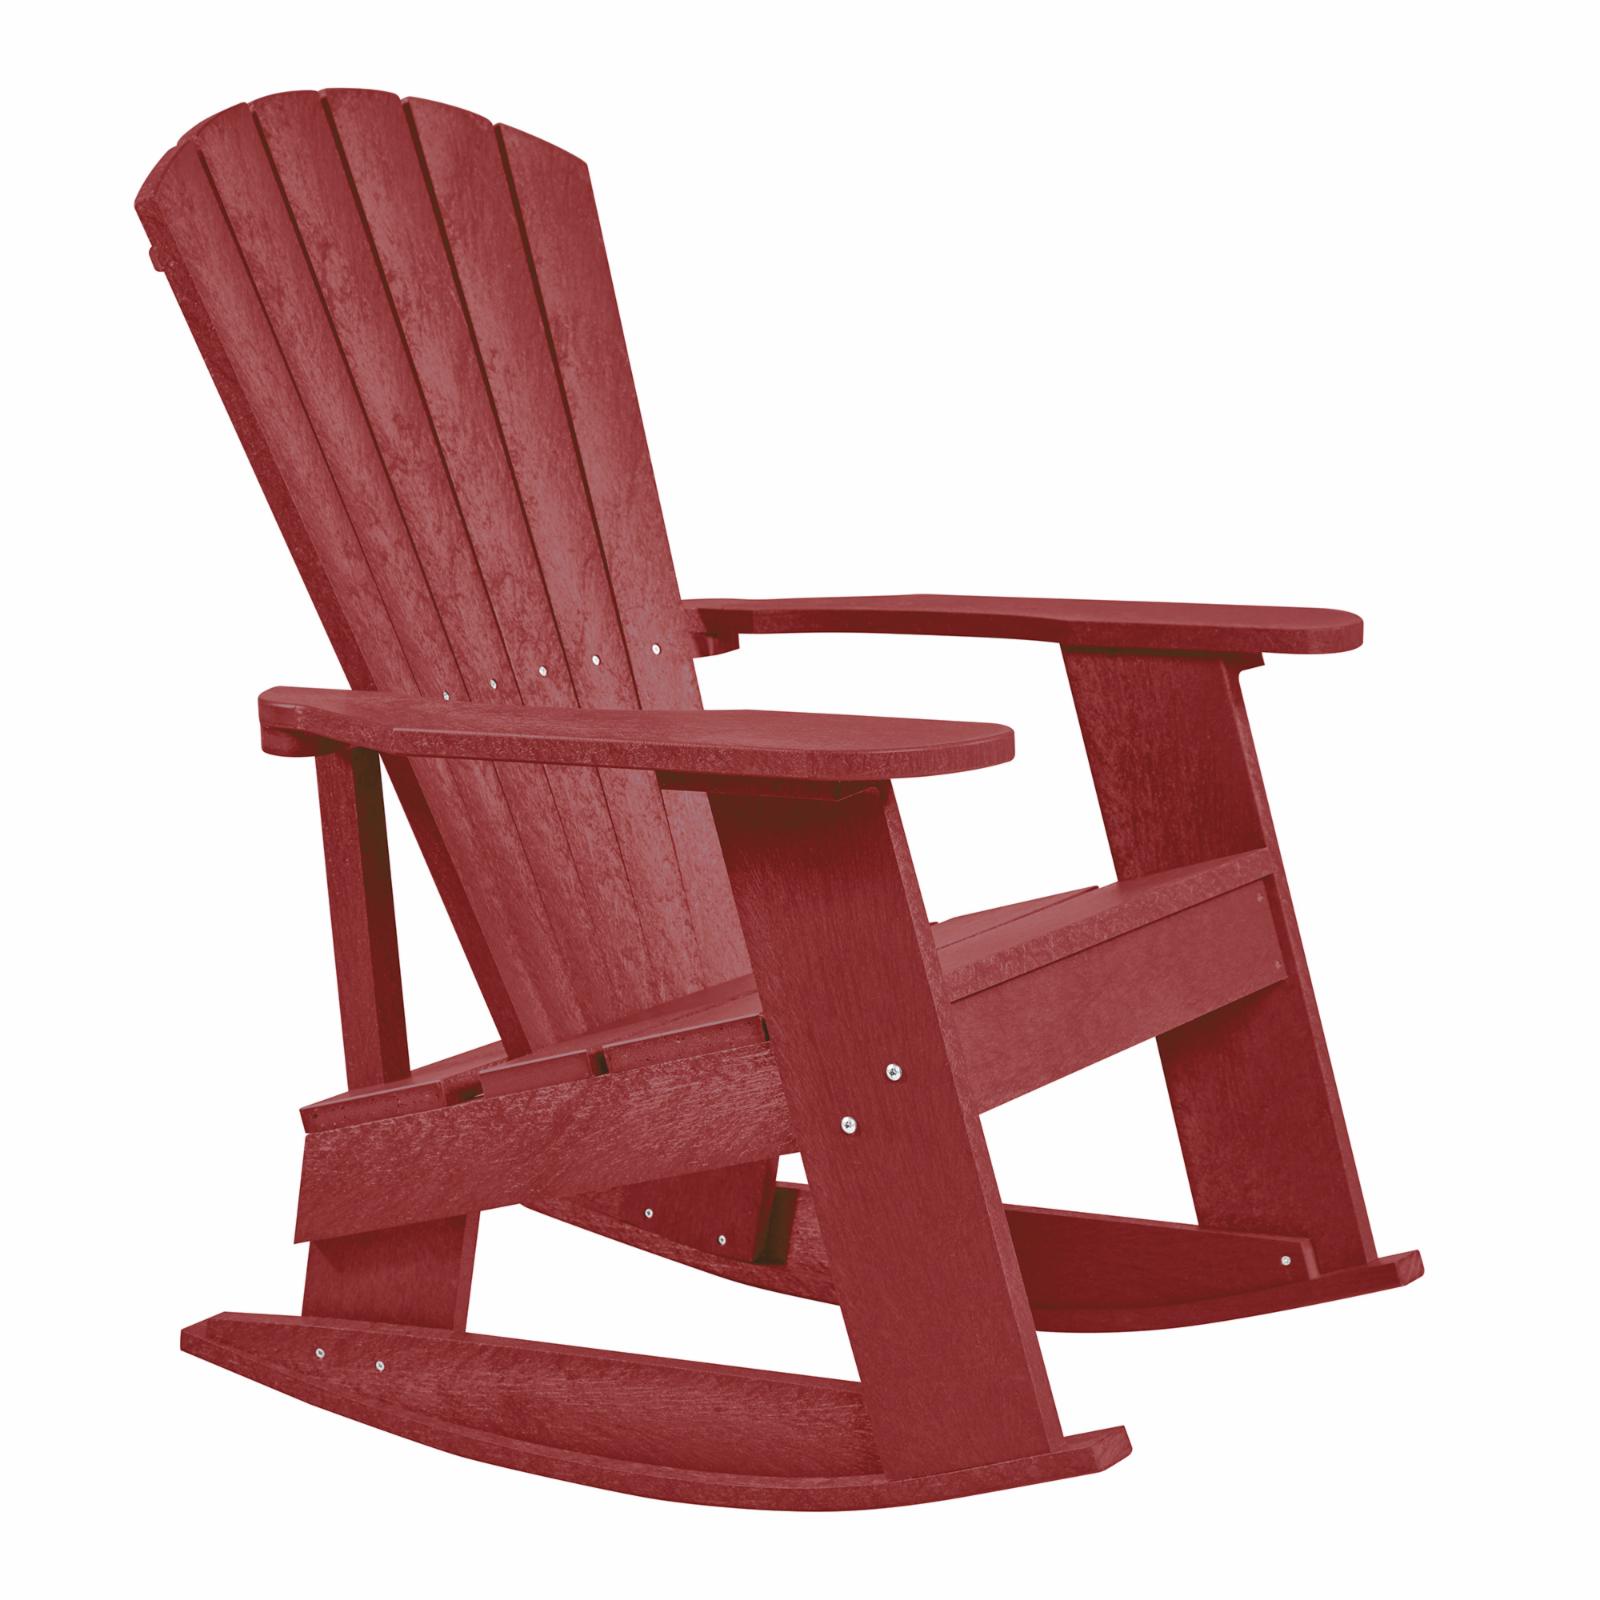 HN Outdoor Logan Recycled Plastic Adirondack Rocking Chair - image 4 of 10